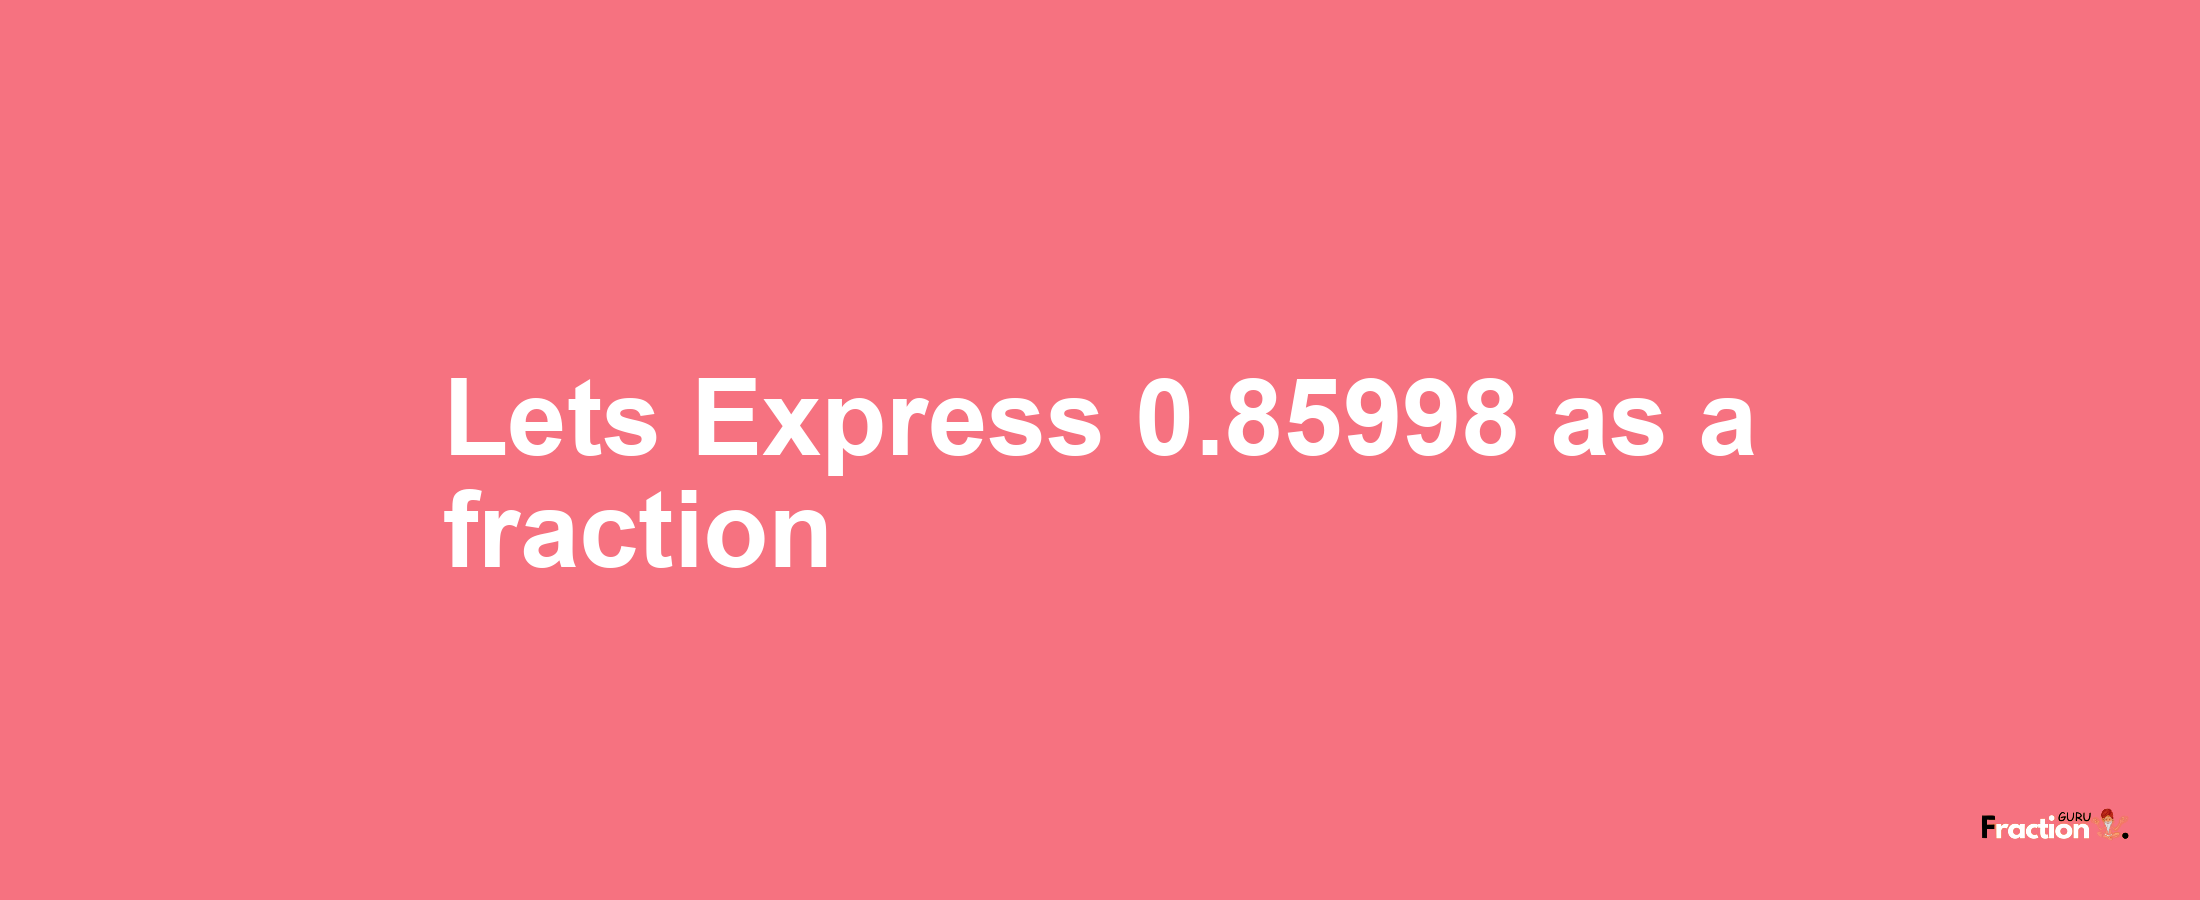 Lets Express 0.85998 as afraction